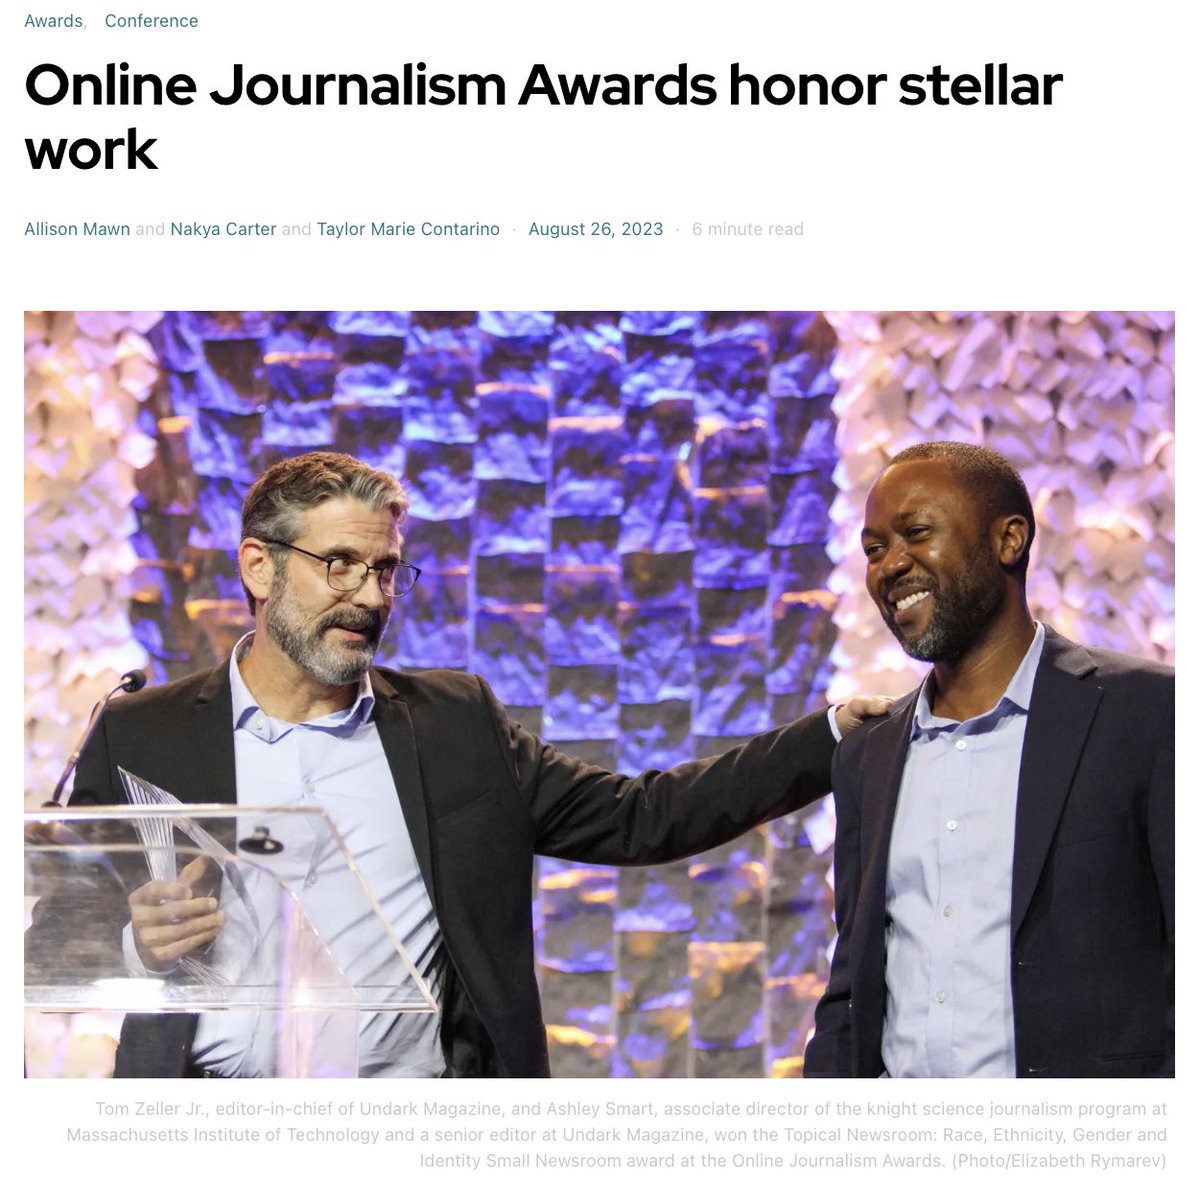 I'm just so proud of @undarkmag and @ashleythesmart. Thanks to @ONA for recognizing this work, and congrats to all of the #ONA23 nominees and winners. If you haven't explored race.undark.org, you're missing out on some powerful #journalism.